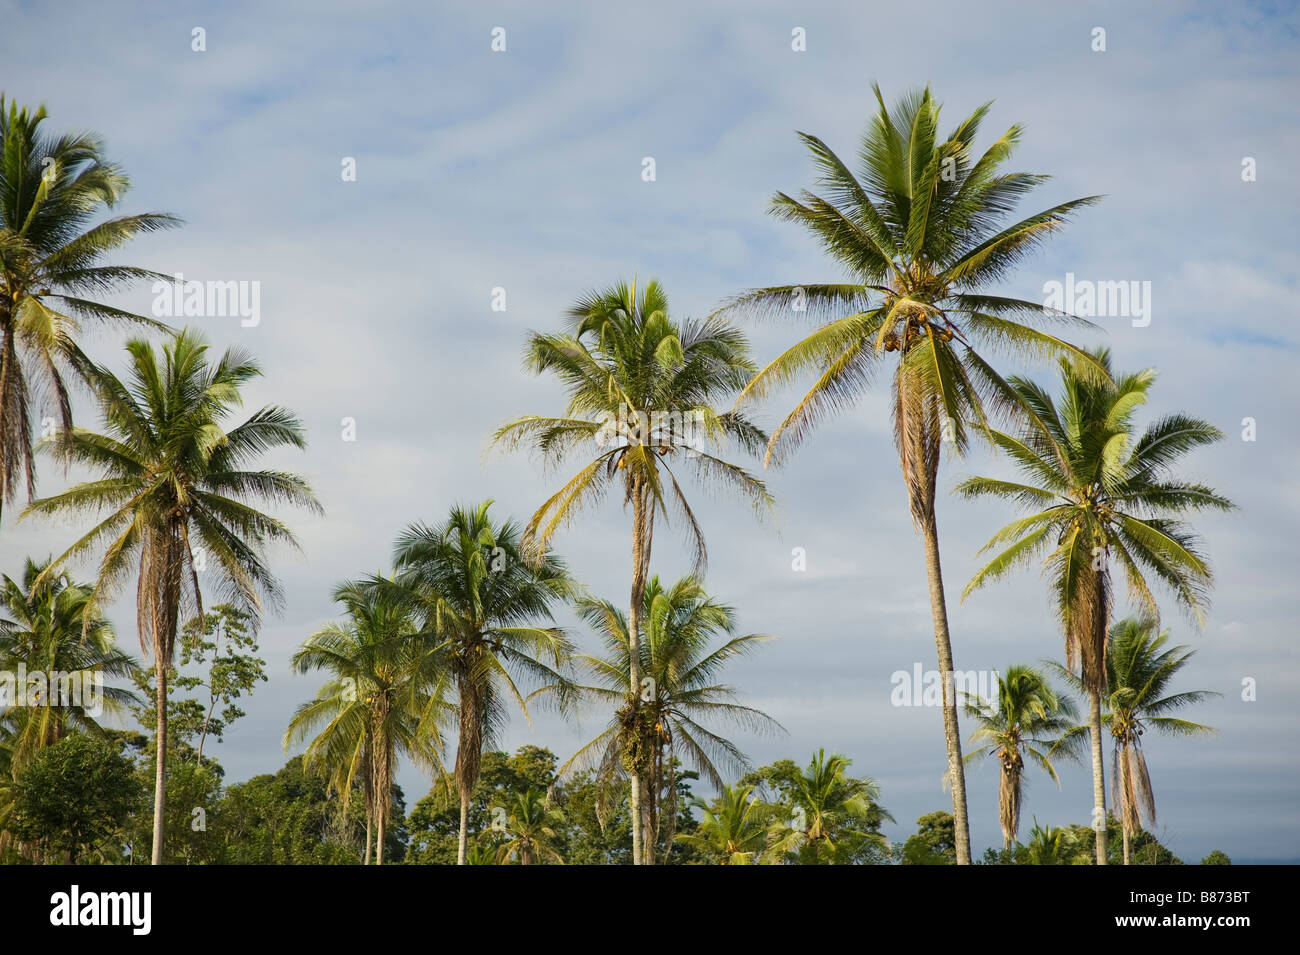 Central America, Costa Rica. Palm trees a true sign of the tropics. Stock Photo